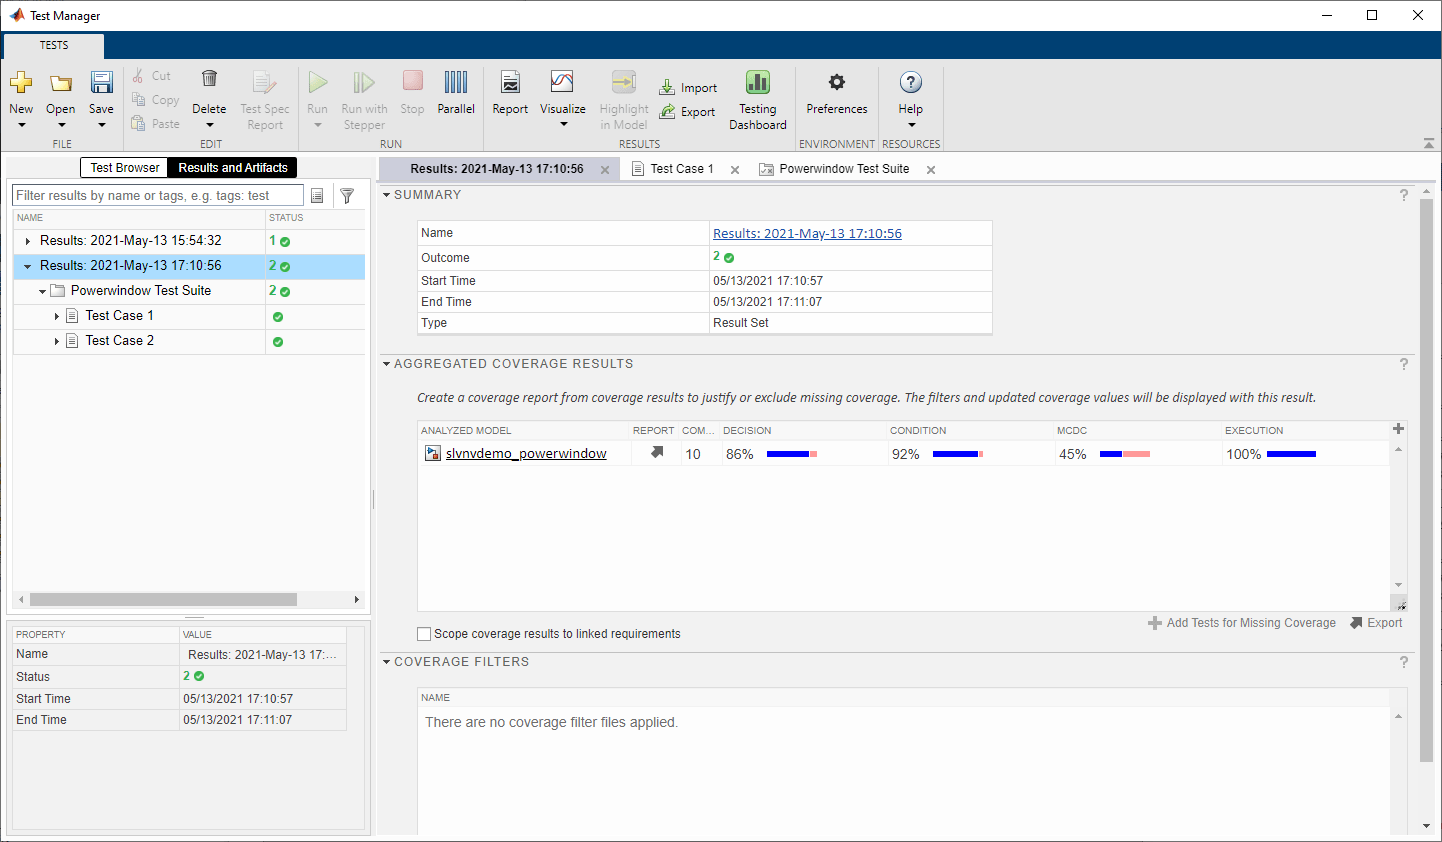 Simulink Test Manager on the Results and Artifacts tab with Powerwindow Test Suite selected. Coverage results are: 86% decision, 92% condition, 45% MCDC, and 100% execution.